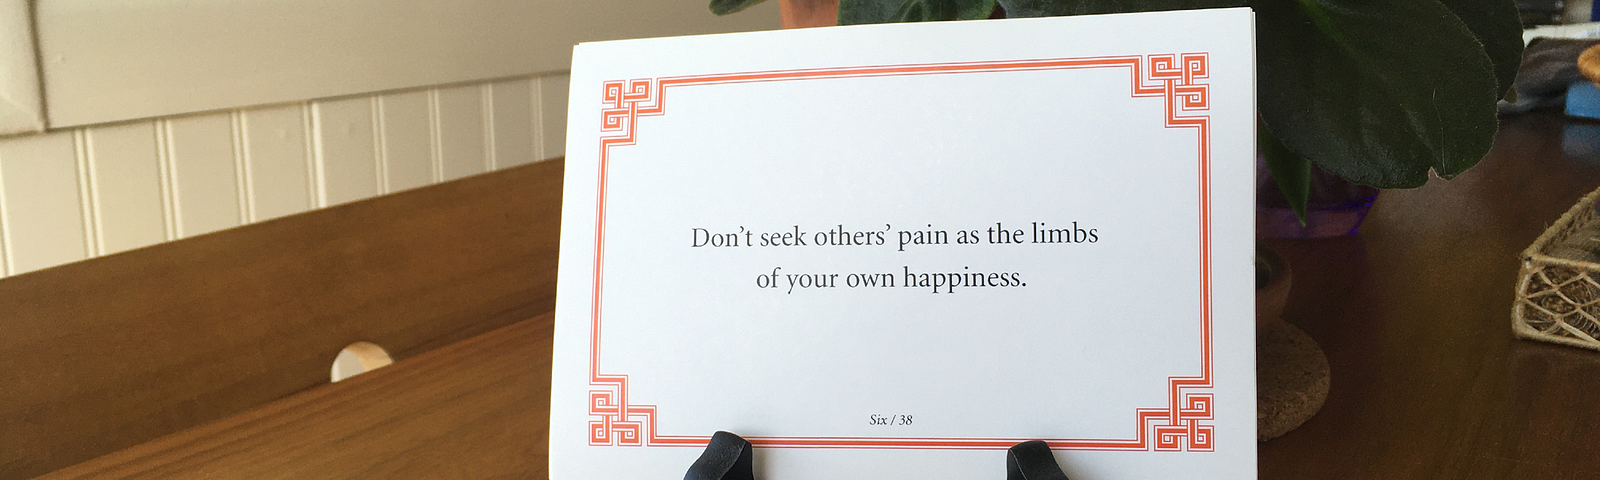 Lojong slogan card reading “Don’t seek others’ pain as the limbs of your own happiness.”